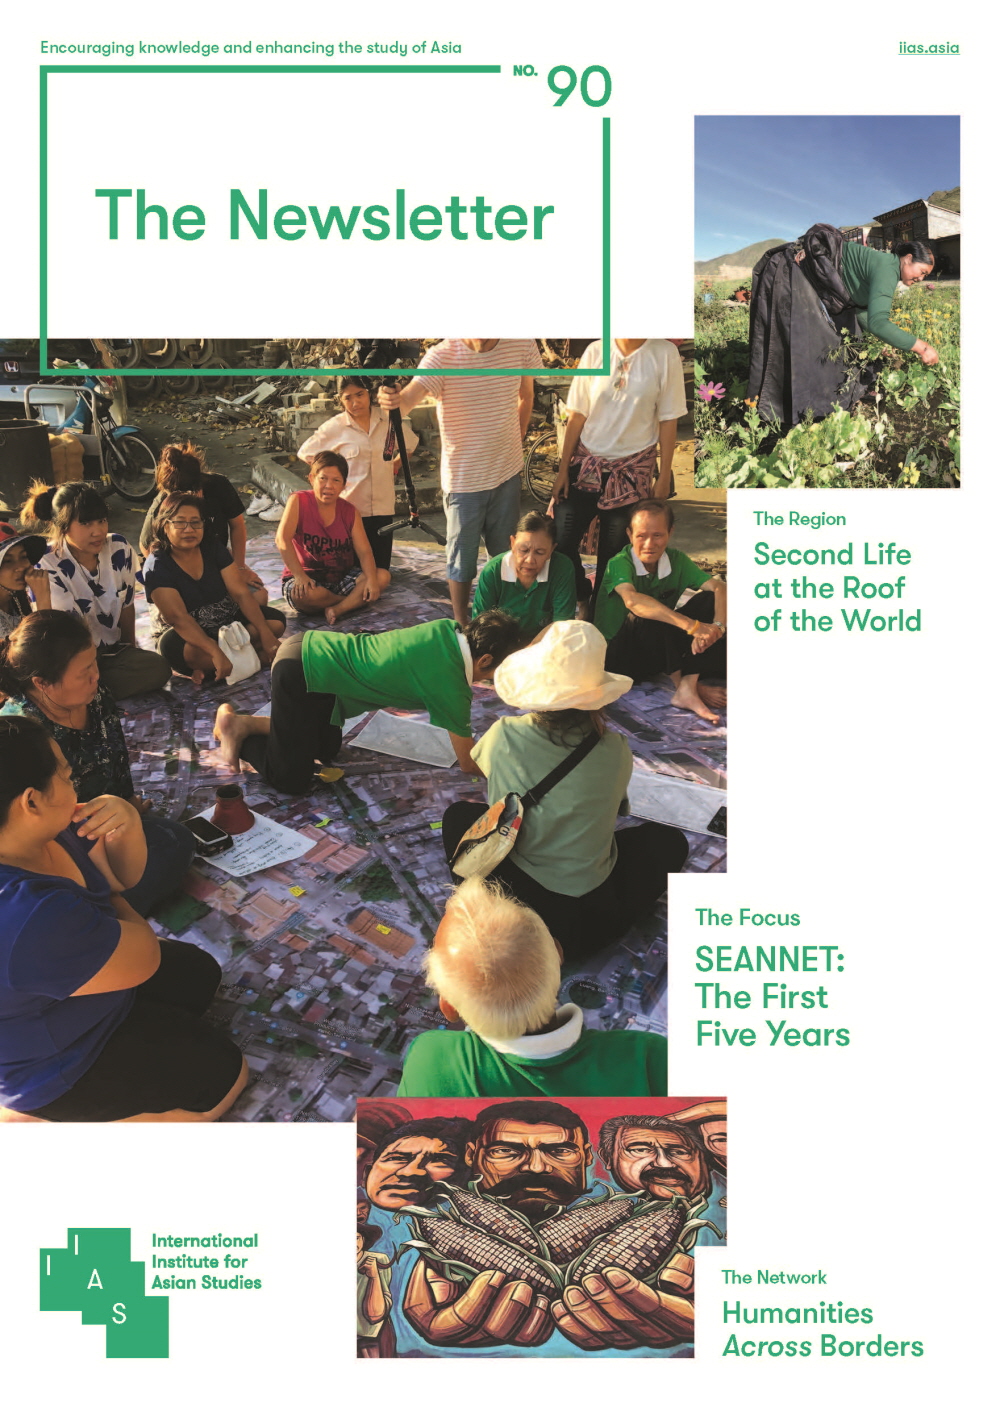 IIAS The Newsletter Vol. 90- News from Northeast Asia